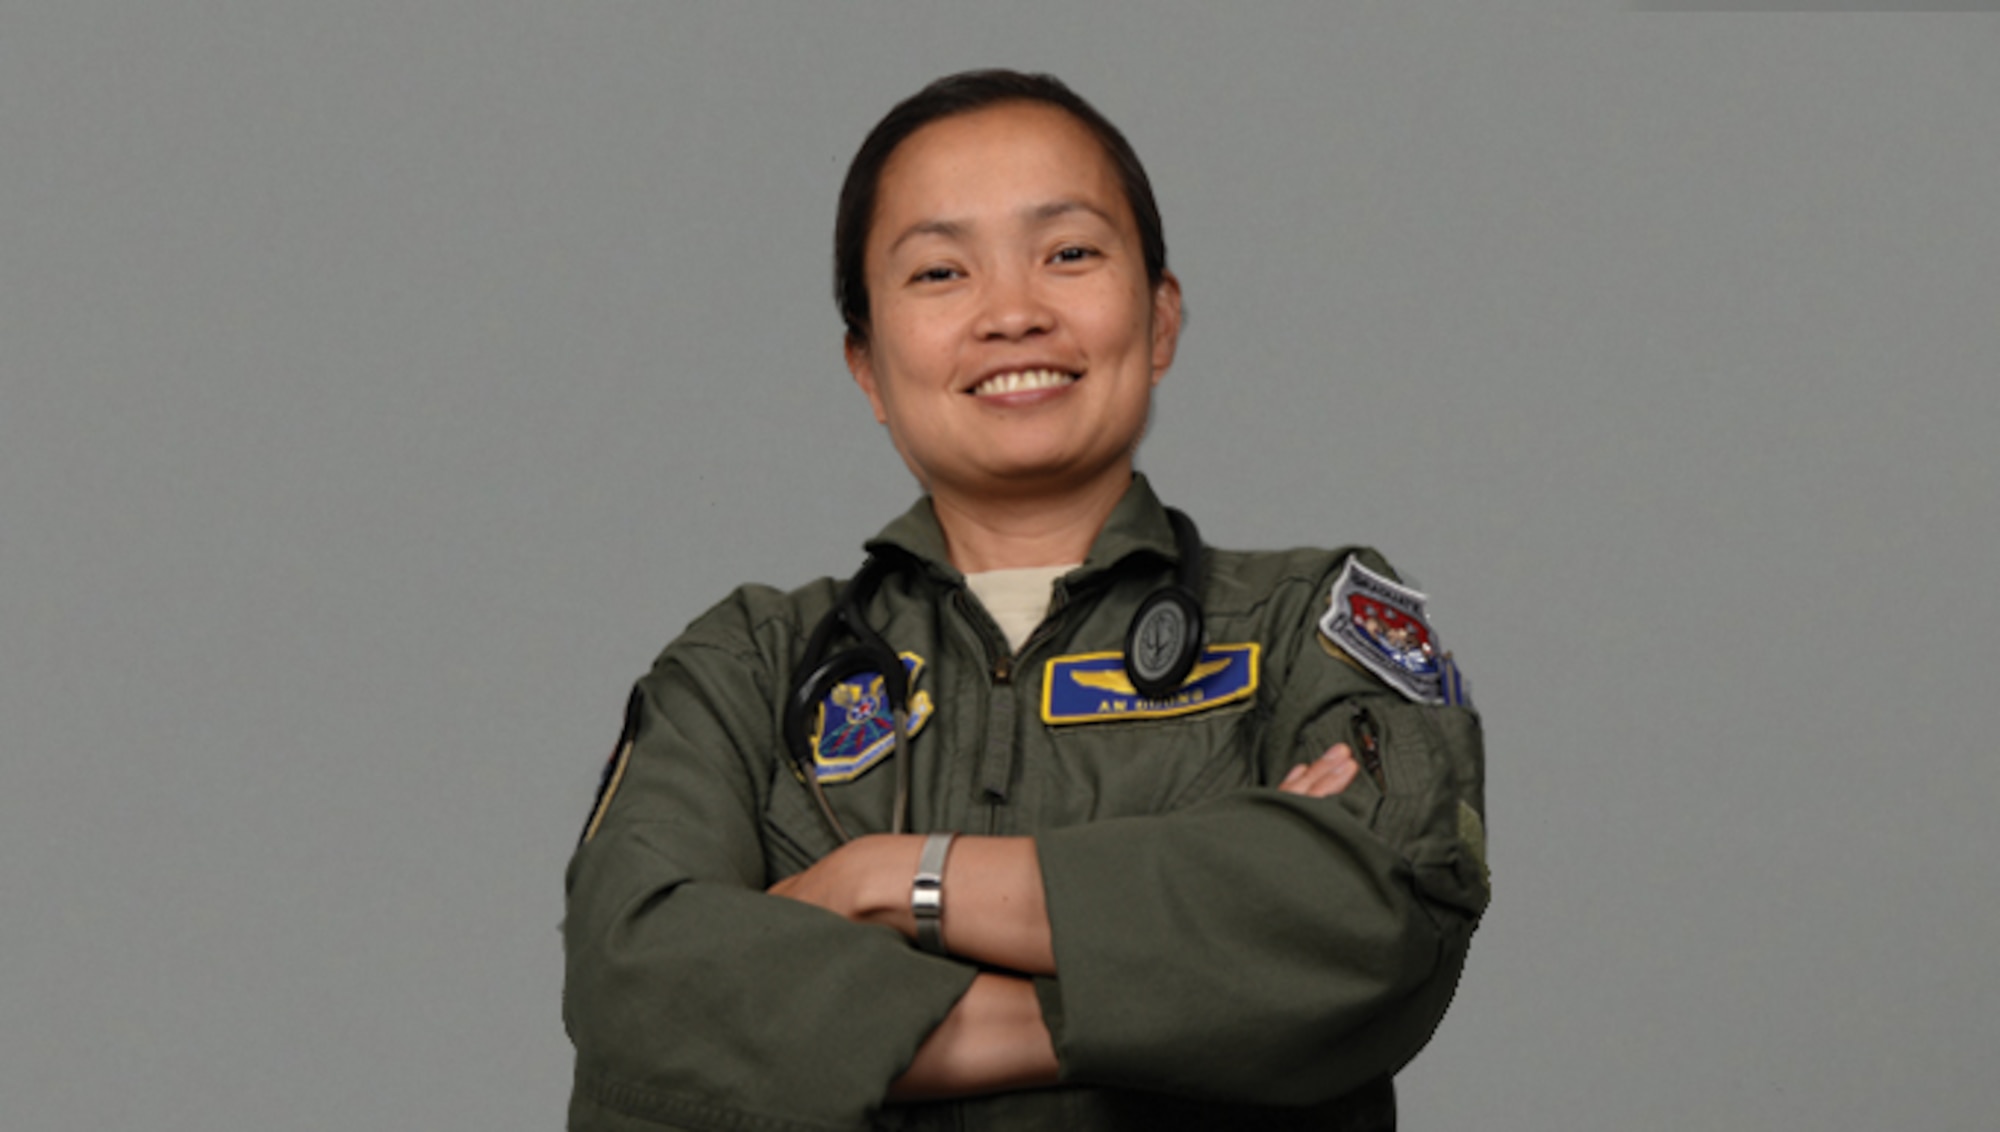 Lt. Col. An Duong, the 28th Medical Group chief of aerospace medicine, poses for a photo at Ellsworth Air Force Base, S.D., May 30, 2018. Duong was born in Vietnam, but moved to the United States and became a medical professional before commissioning into the Air Force. (U.S. Air Force photo illustration by Airman 1st Class Nicolas Z. Erwin)